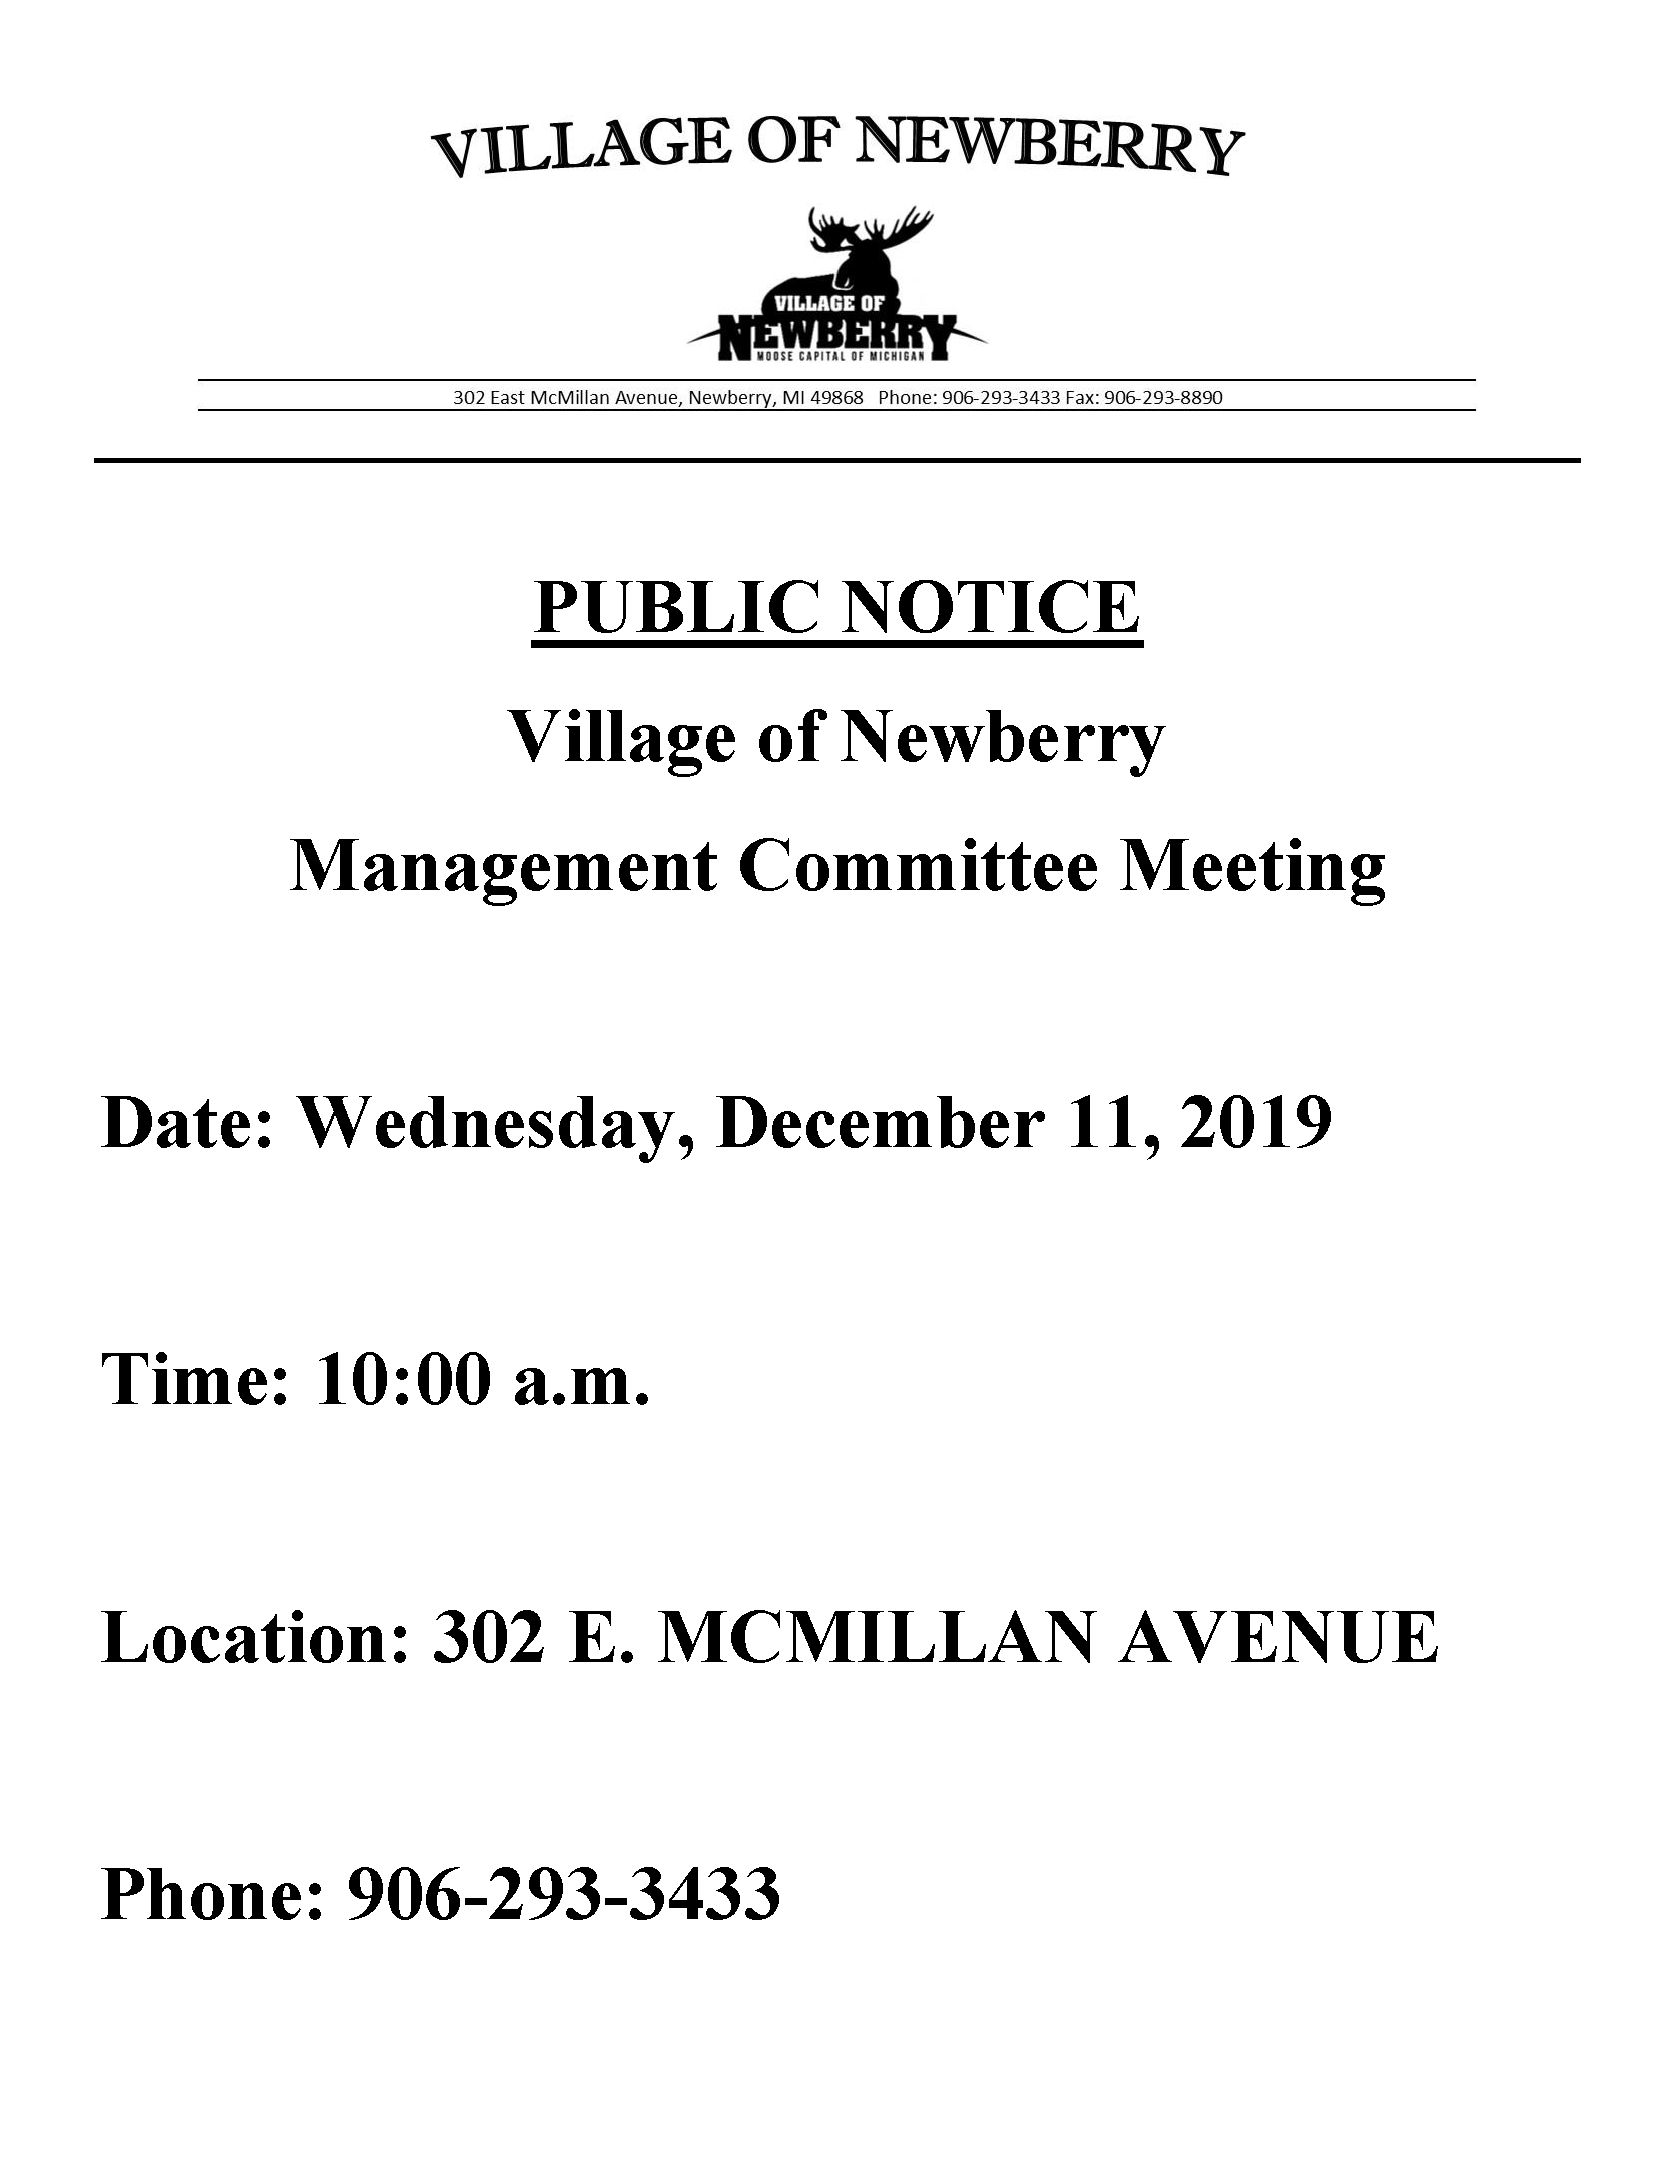 Management_Committee_Meeting_12-11-19_posting